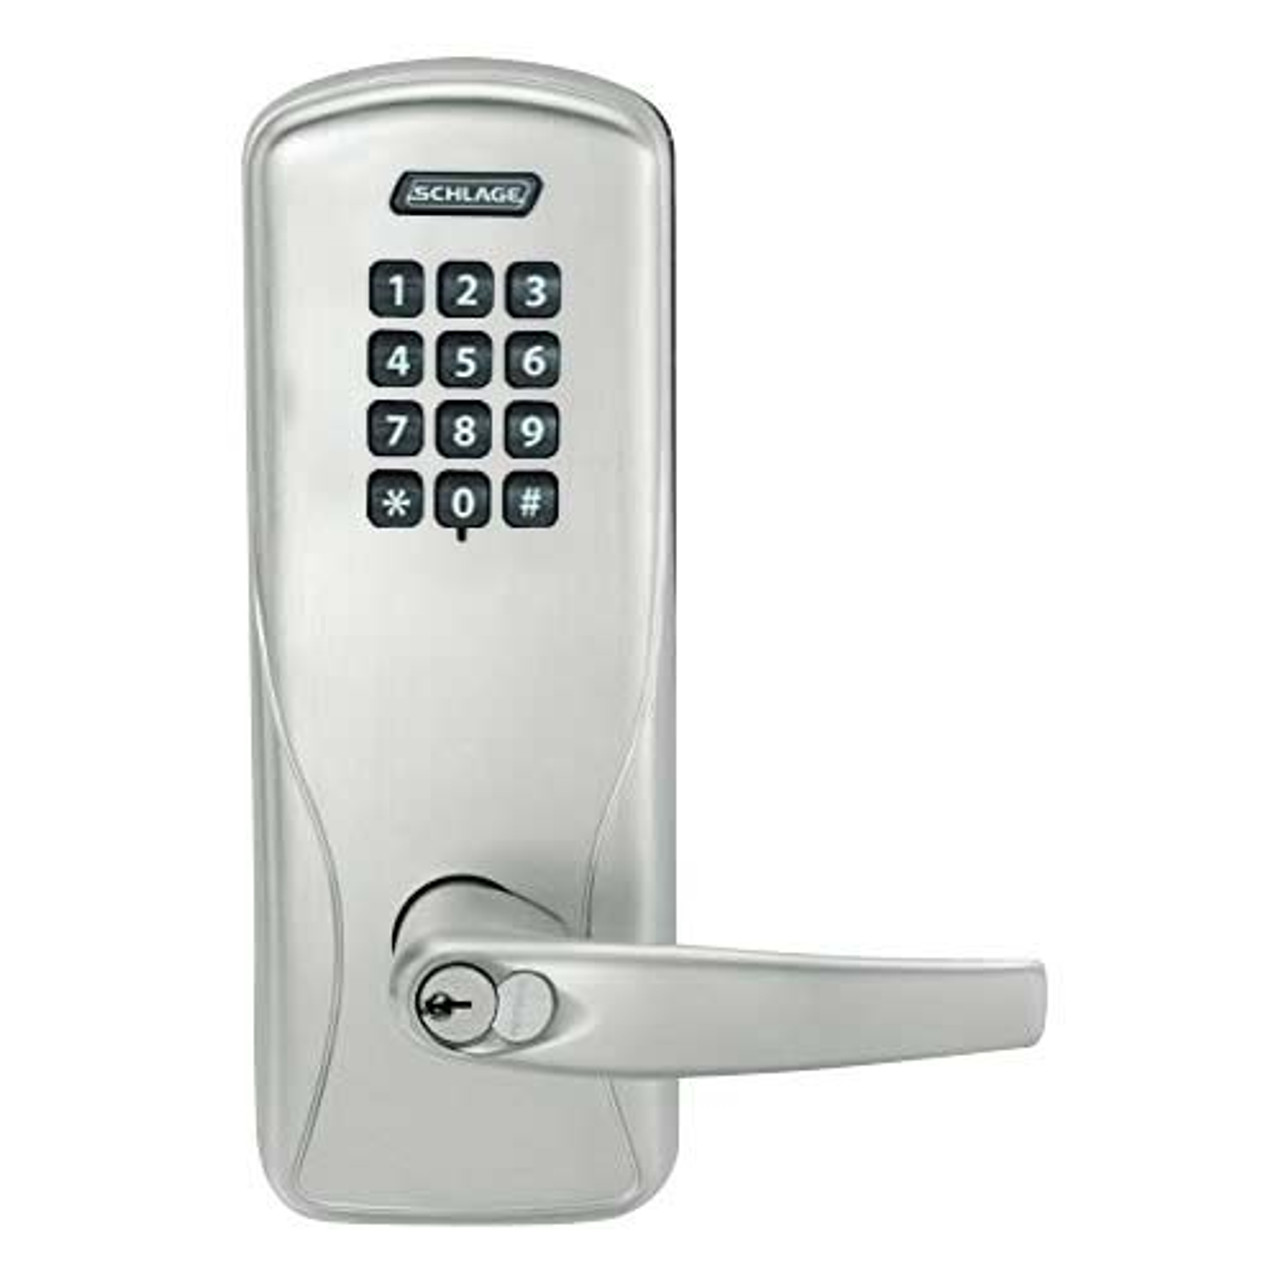 CO100-MS-50-KP-ATH-RD-619 Schlage Standalone Mortise Electronic Keypad locks in Satin Nickel